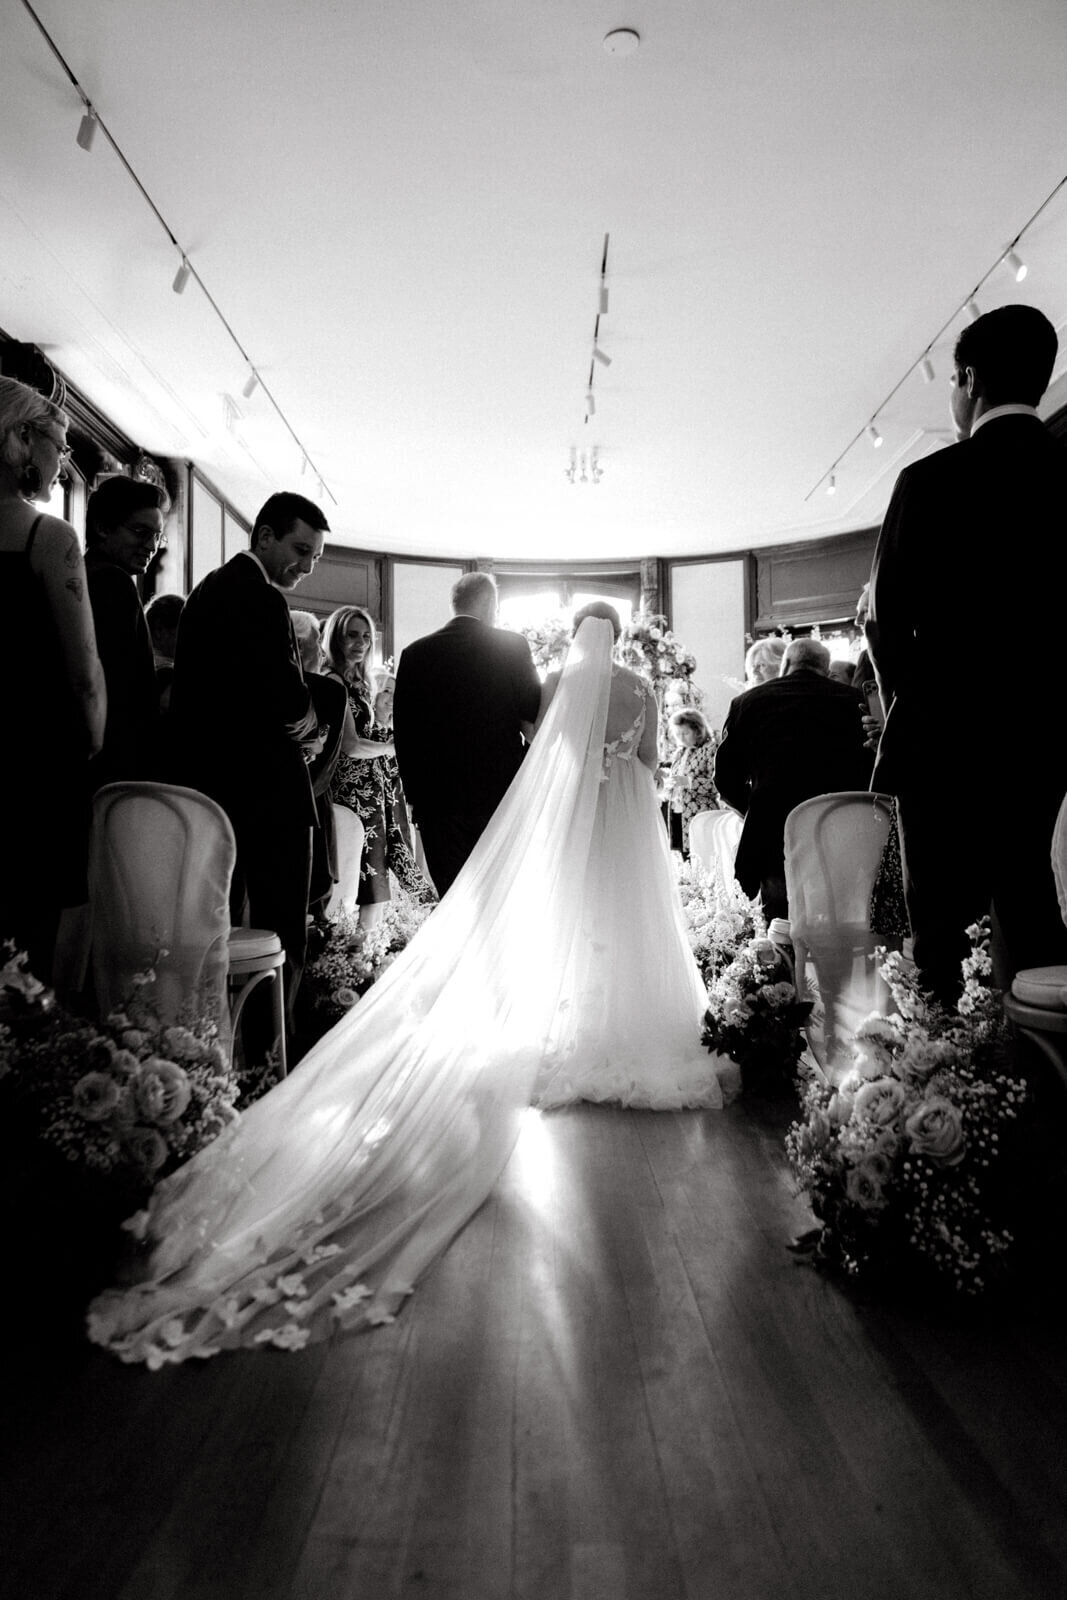 Black and white photo of the bride and the groom, standing on their backs, with people standing on both sides.